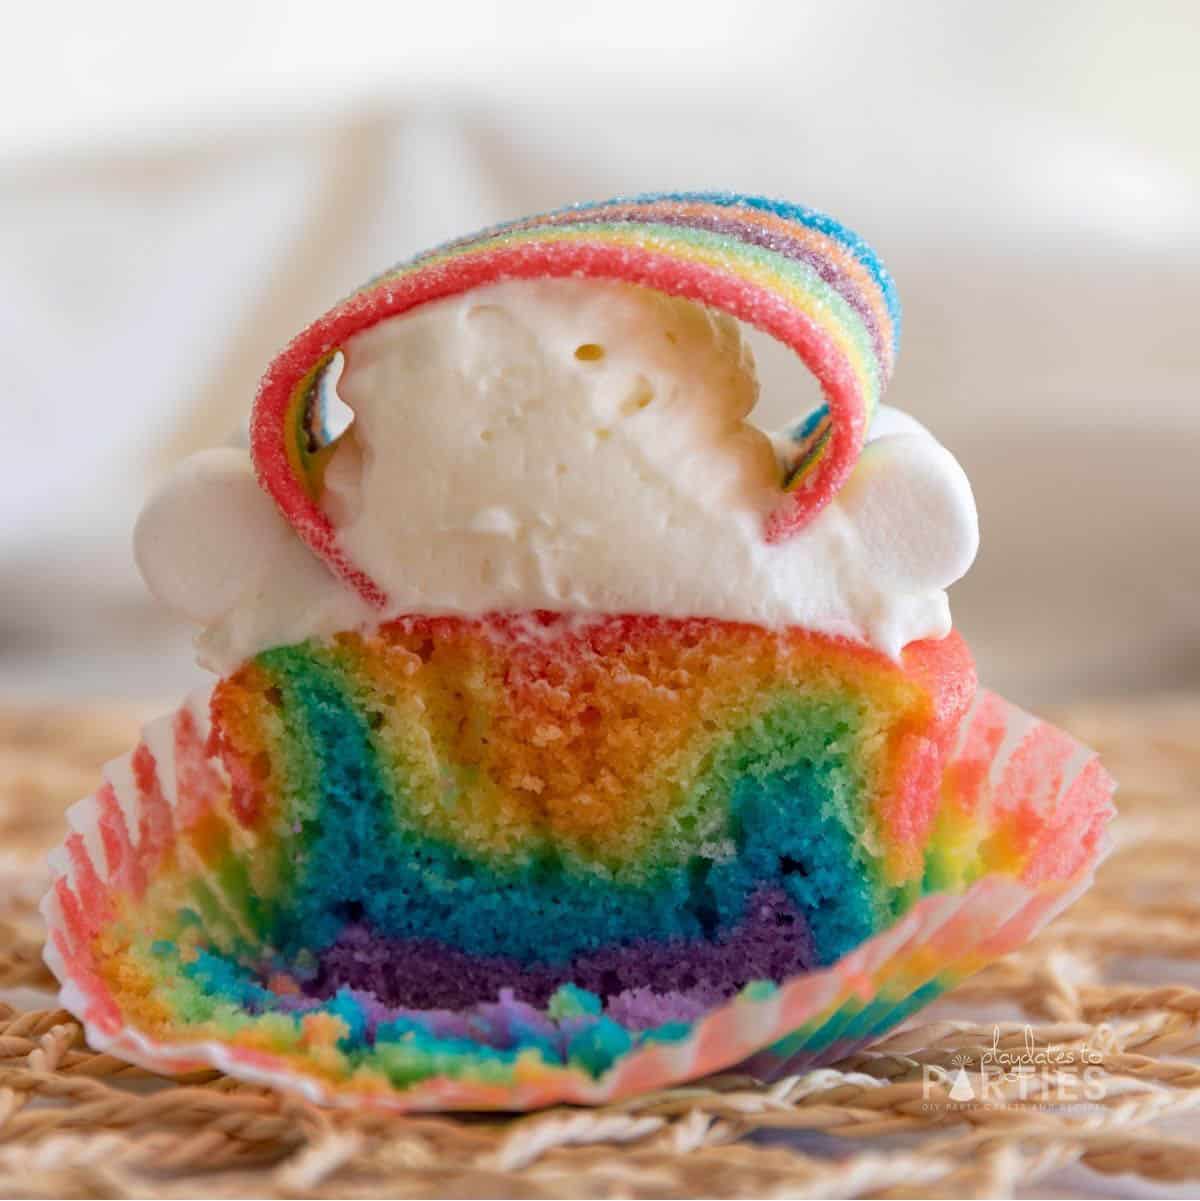 Cross section of a rainbow cupcake that shows the layers of purple, blue, green, yellow, orange, and red.